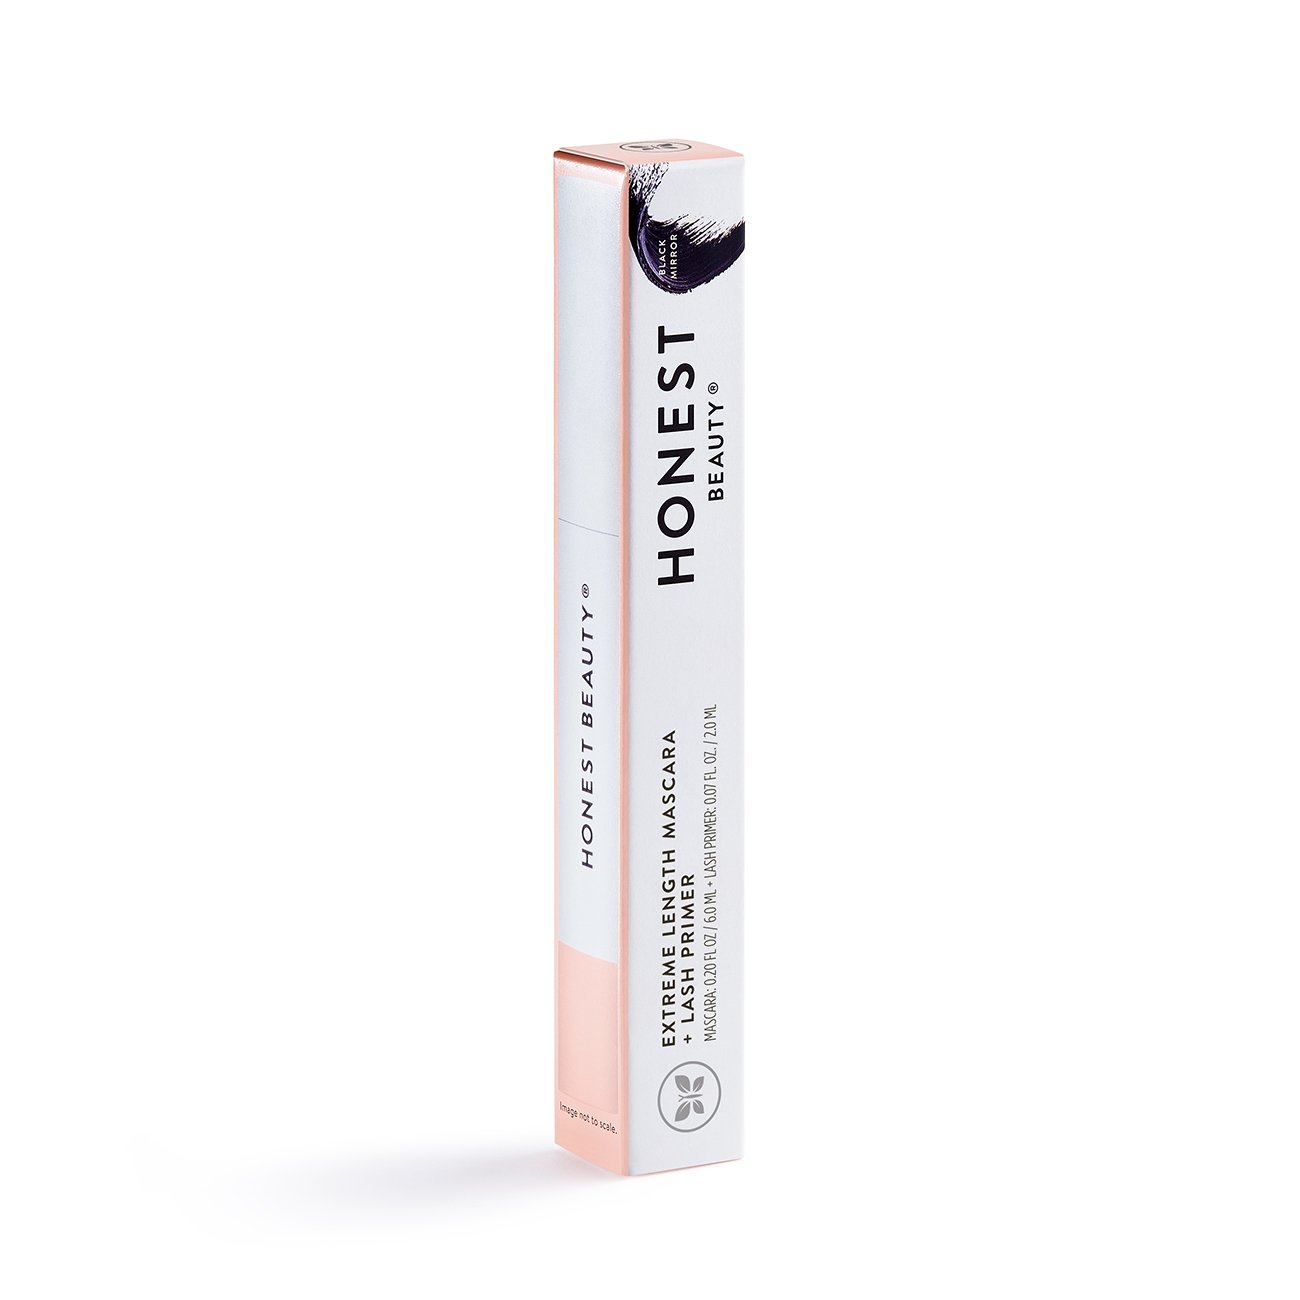  Honest Beauty Extreme Length Mascara + Lash Primer | 2-in-1 Boosts Lash Length, Volume & Definition | Silicone Free, Paraben Free, Dermatologist & Ophthalmologist Tested, Cruelty F